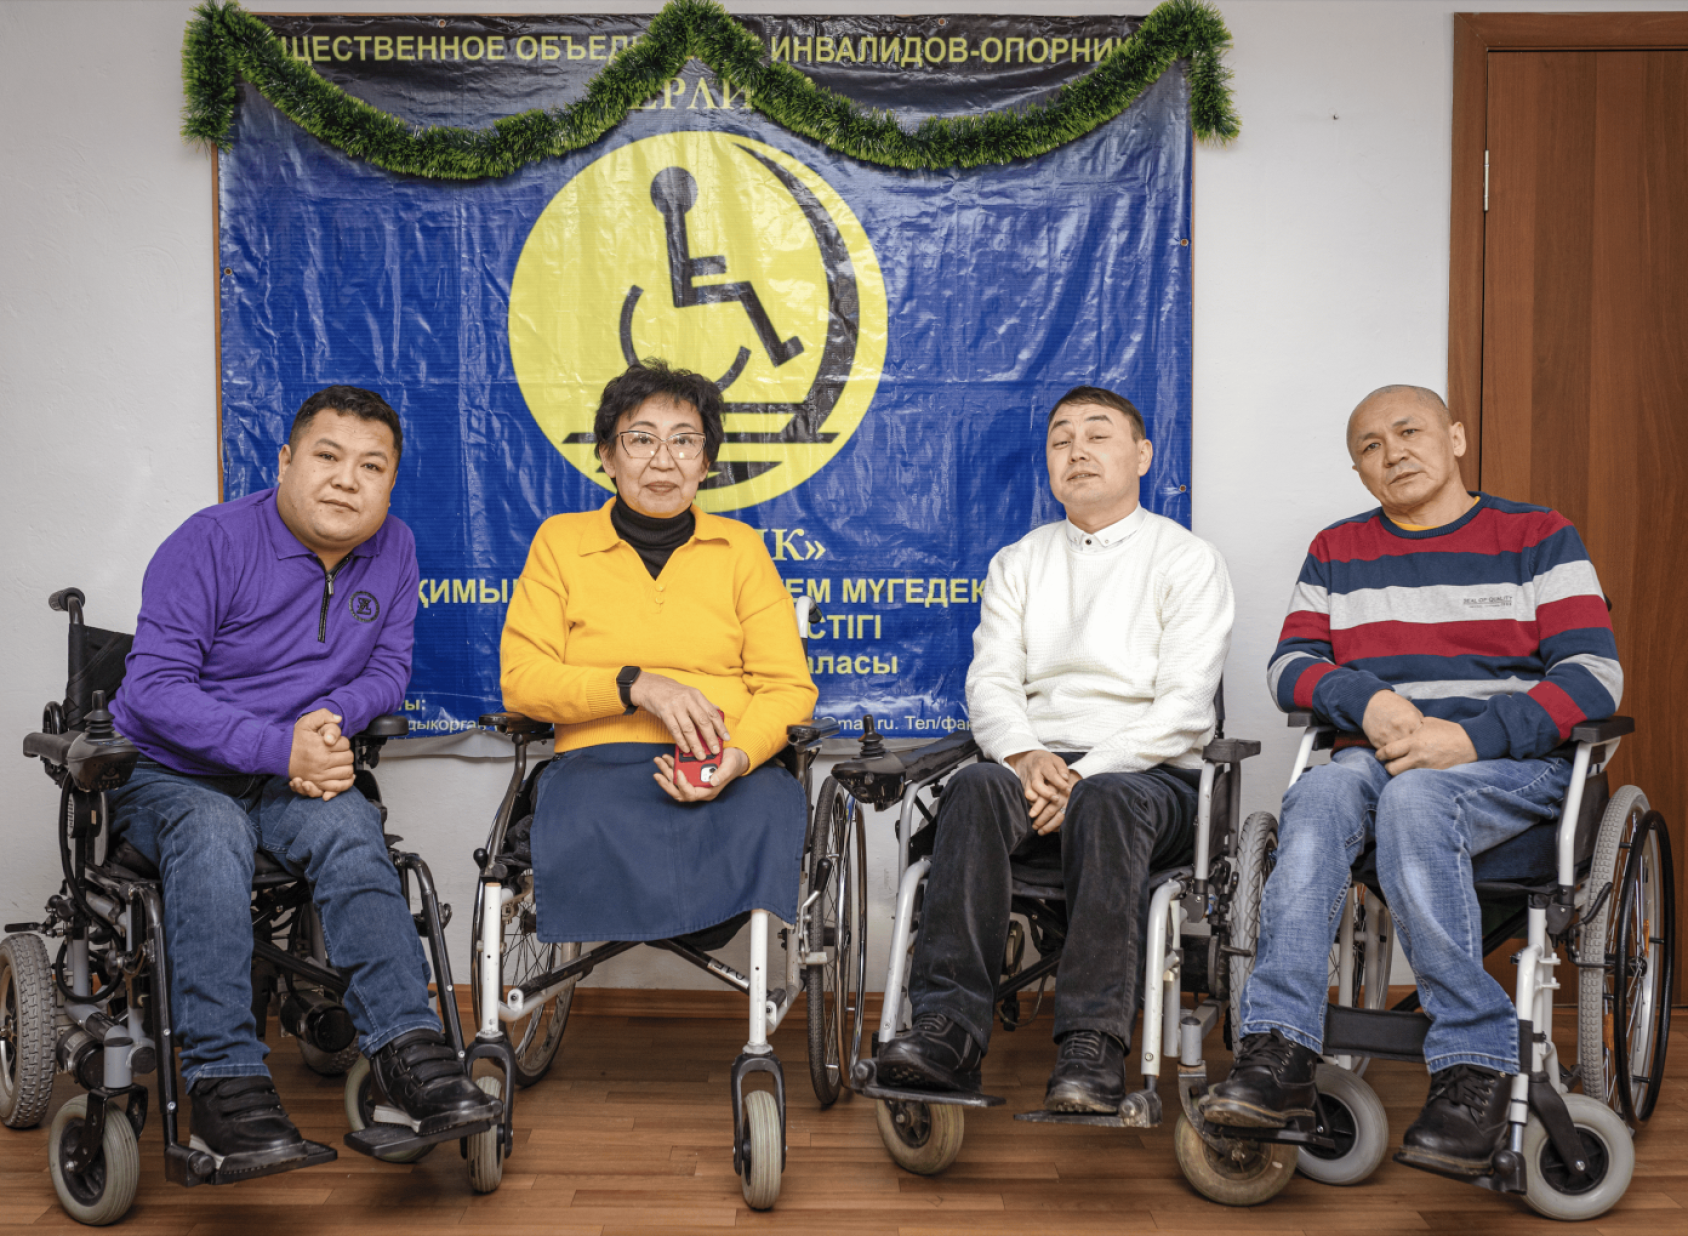 Four people in wheelchairs next to each other